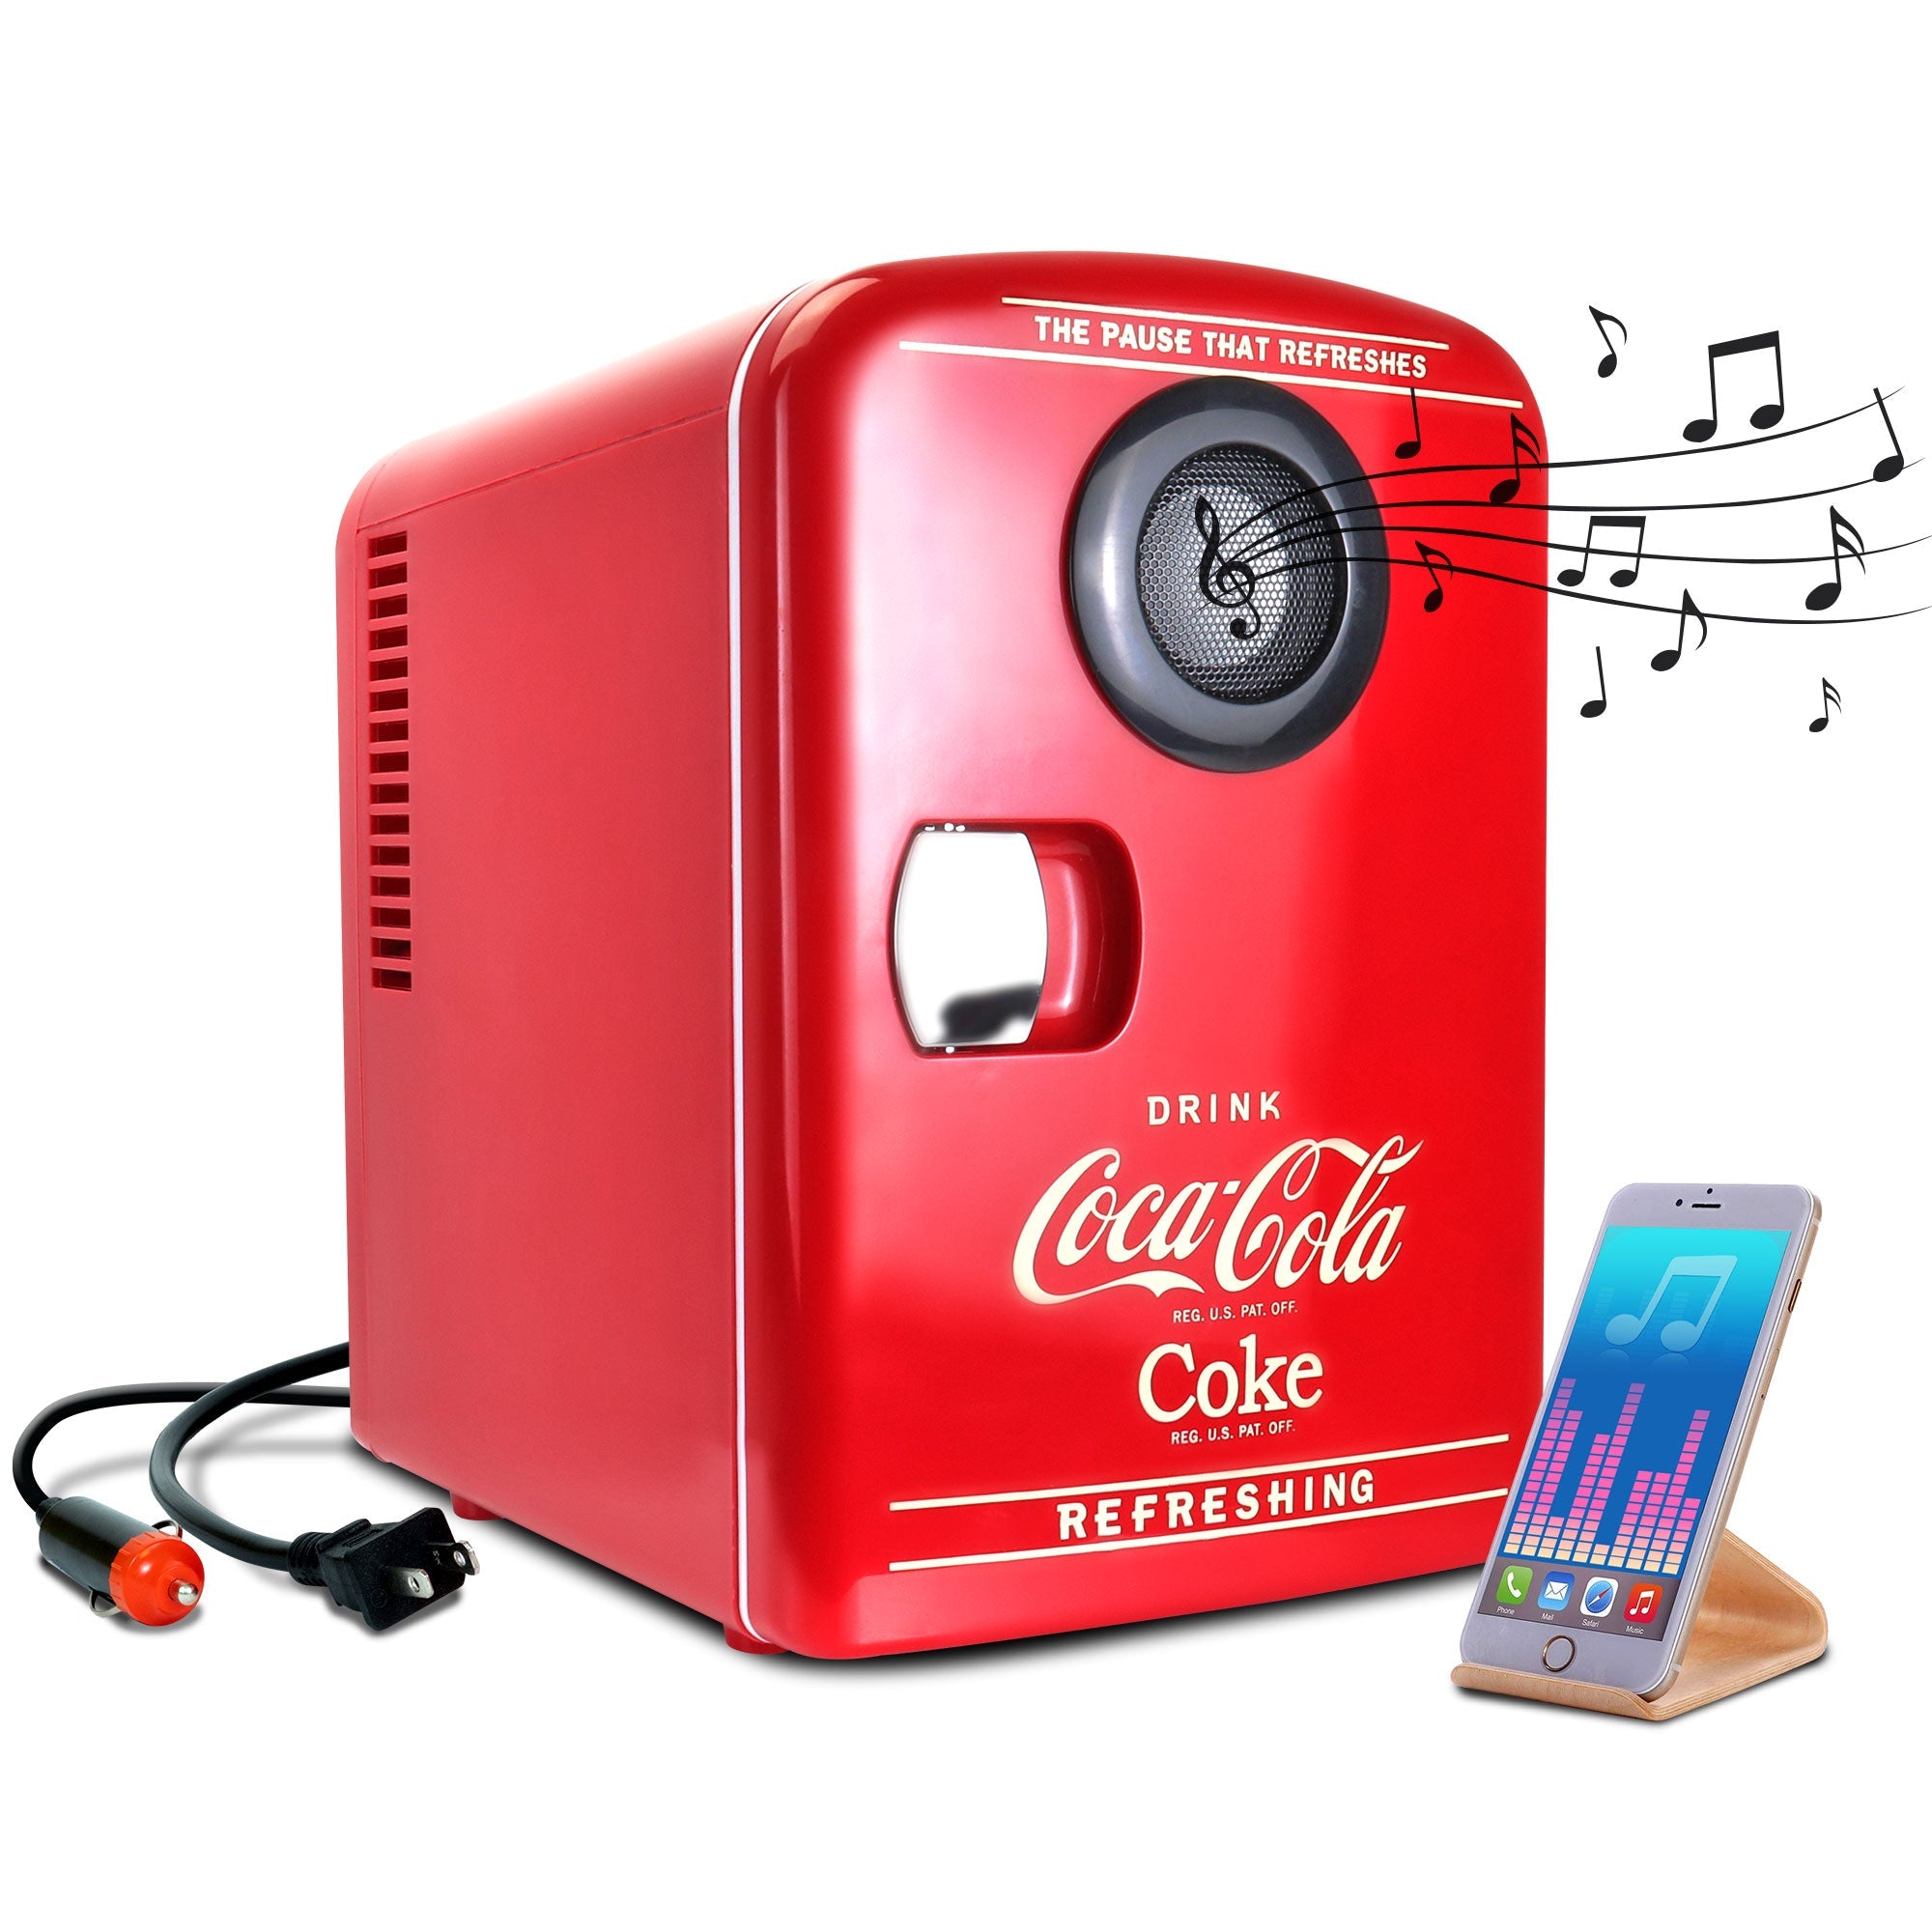 Product shot of Coca-Cola 4L mini fridge with Bluetooth speaker, closed, with AC and DC power cords visible, on a white background. There is a smartphone or music player on a stand in the foreground and small black music notes emanating from the speaker 